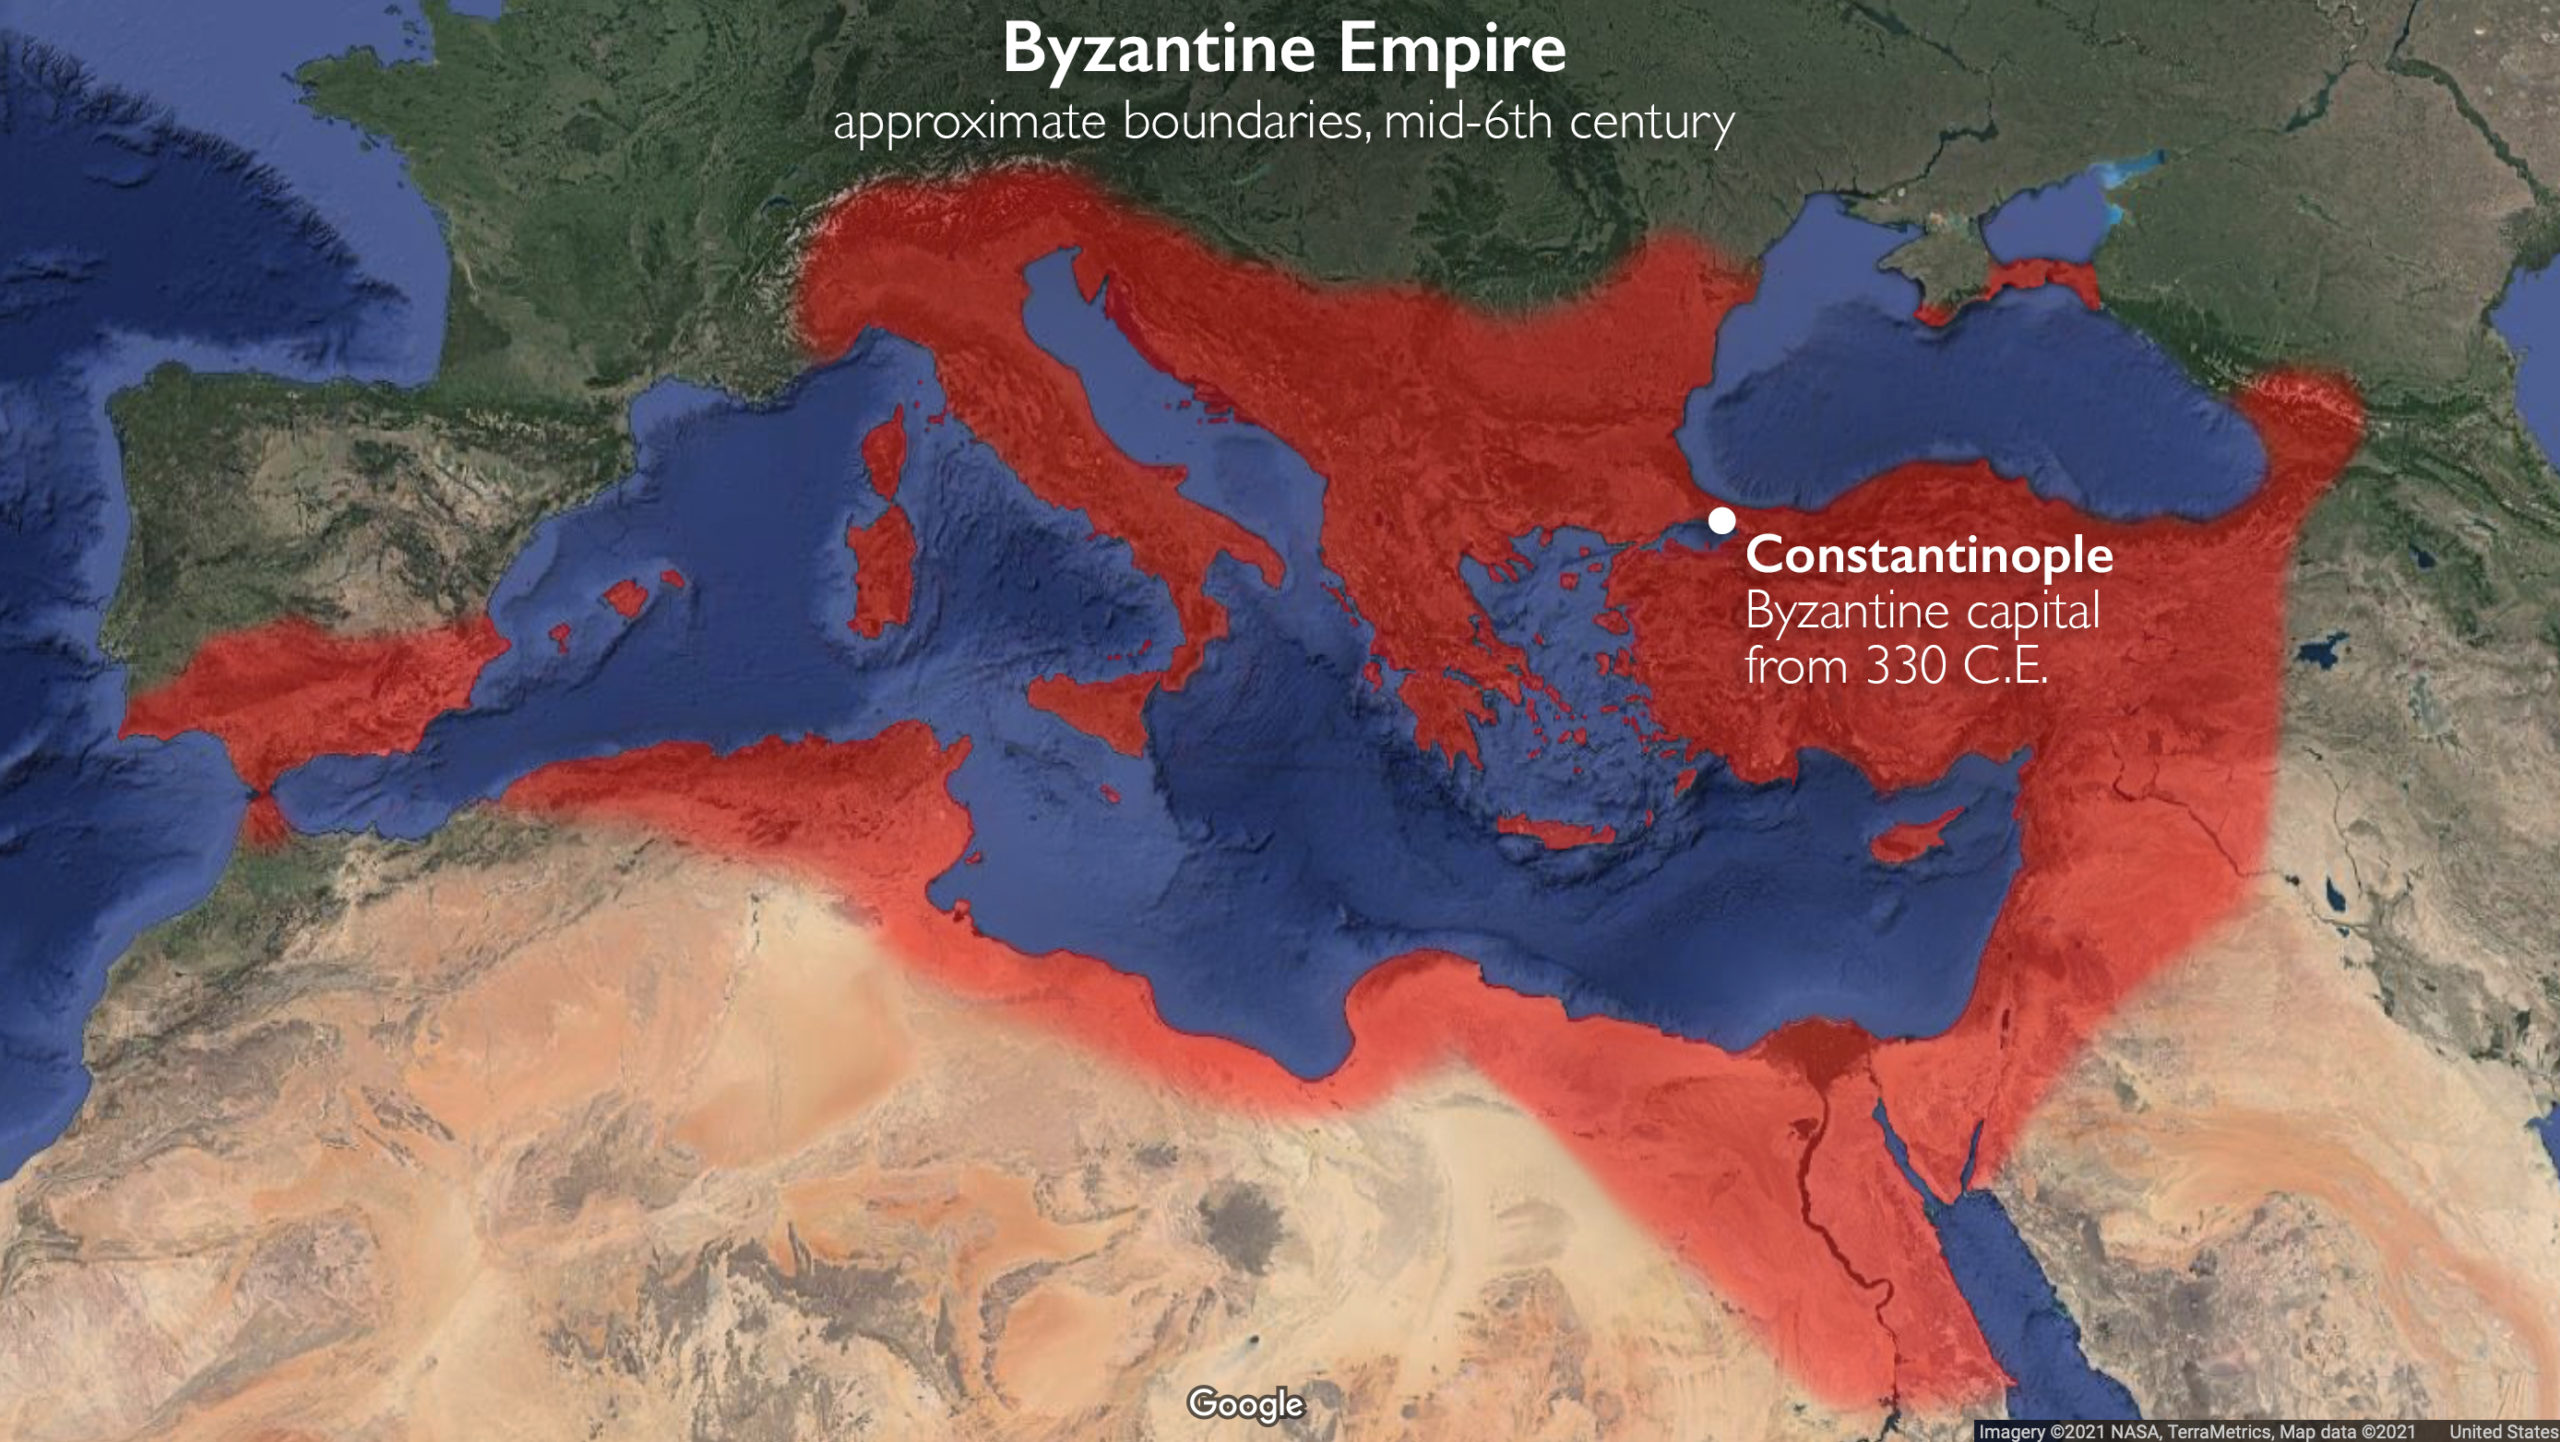 Map of Byzantine Empire, approximate boundaries, mid-6th c. (underlying map © Google)